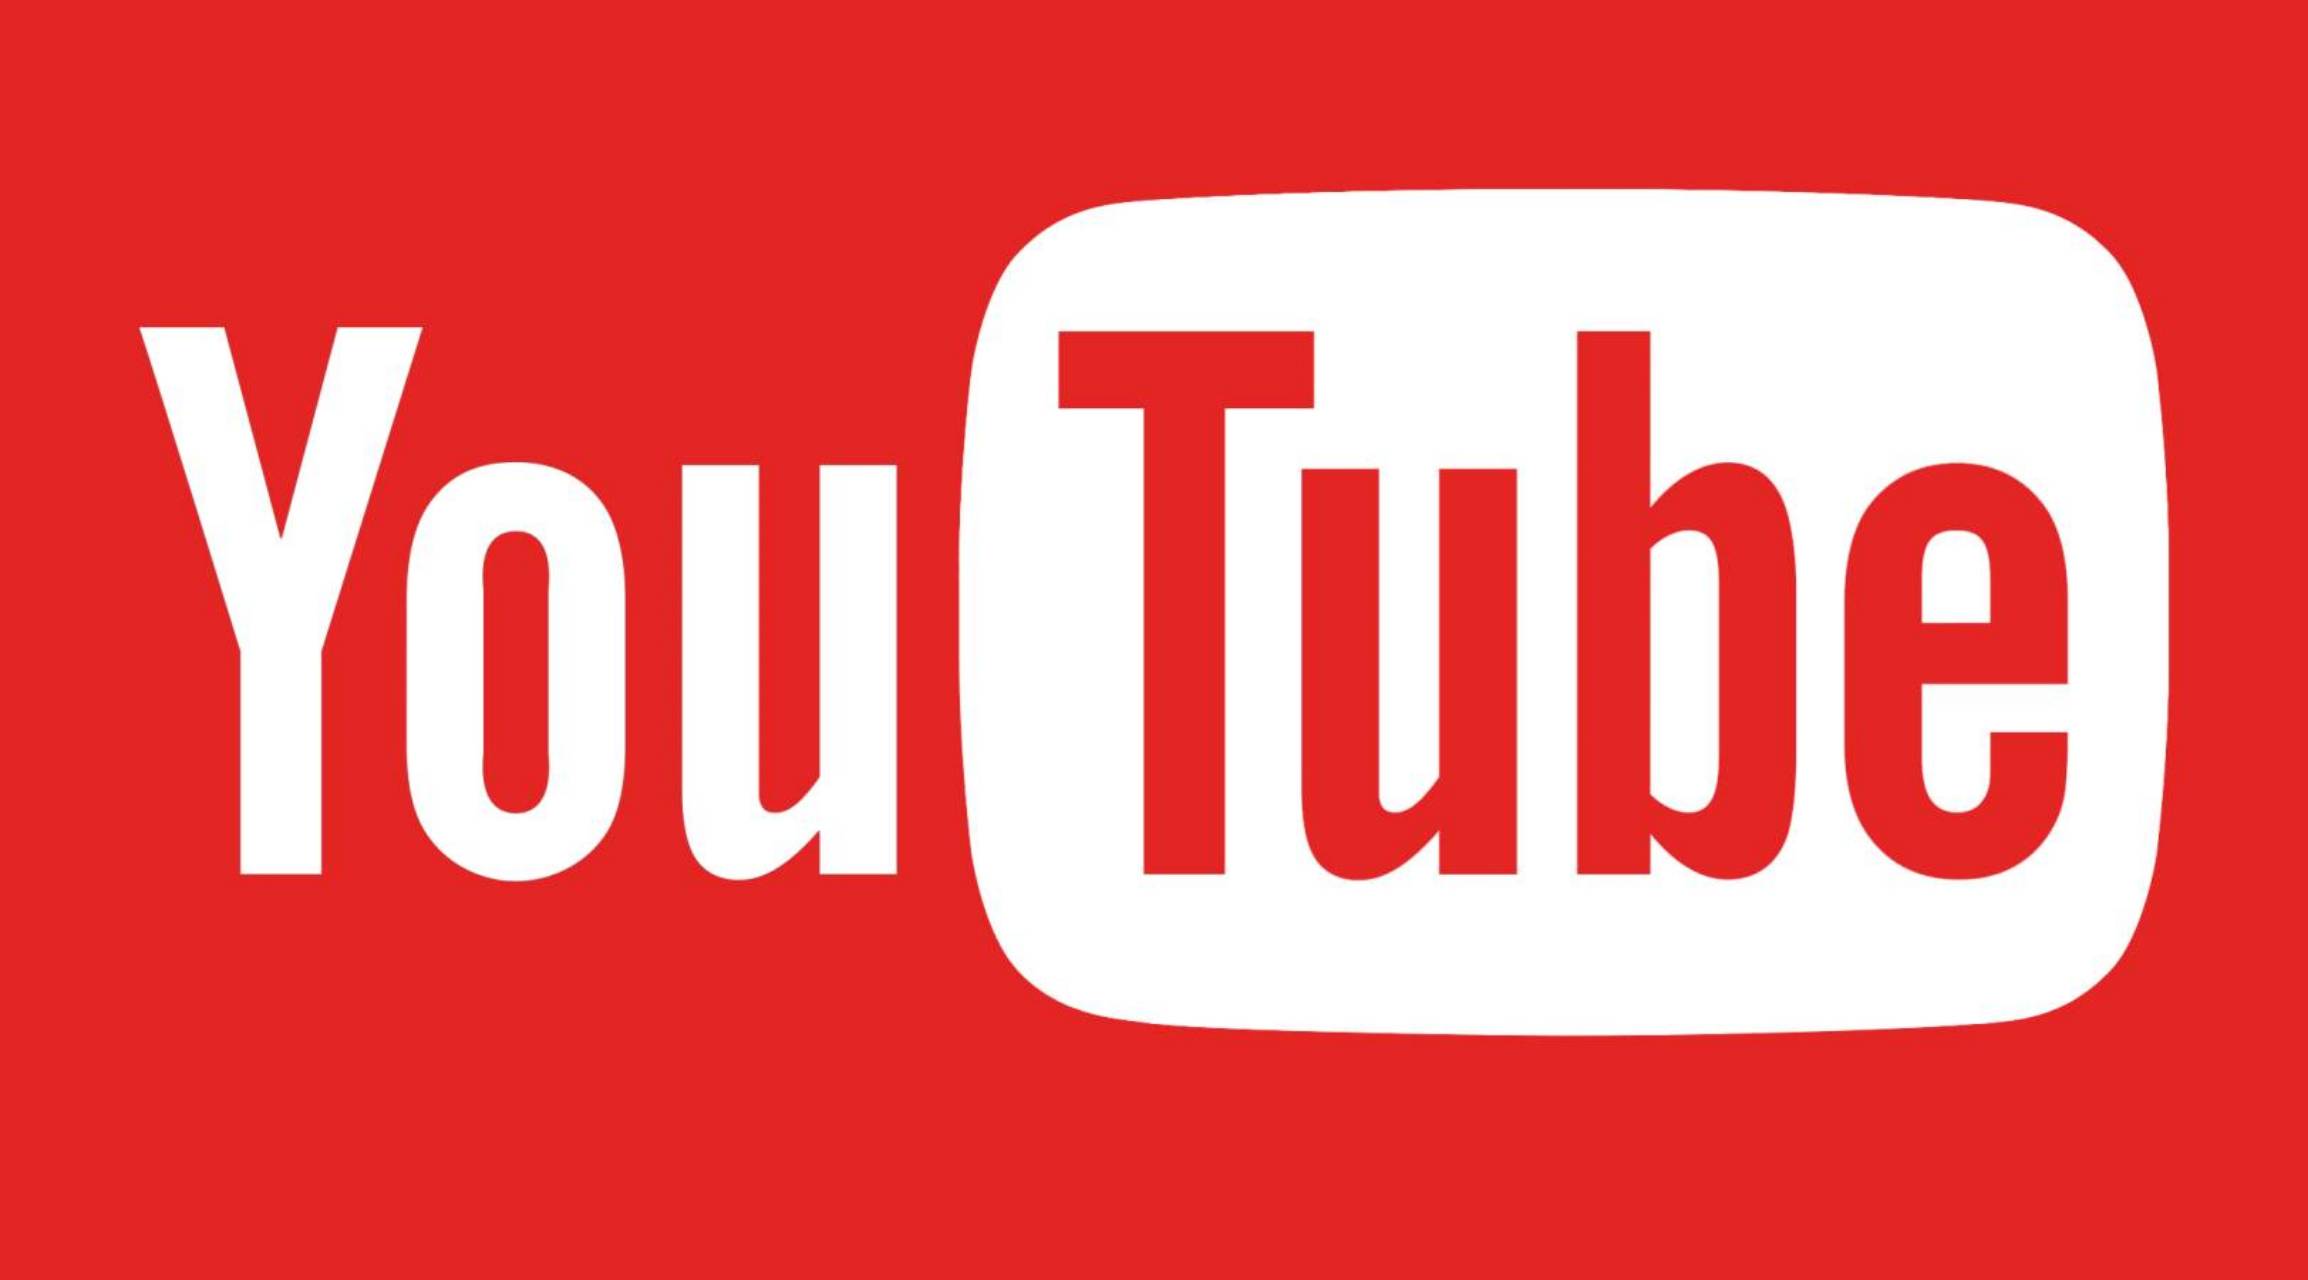 YouTube: The new Update offered for the Application offered by Google